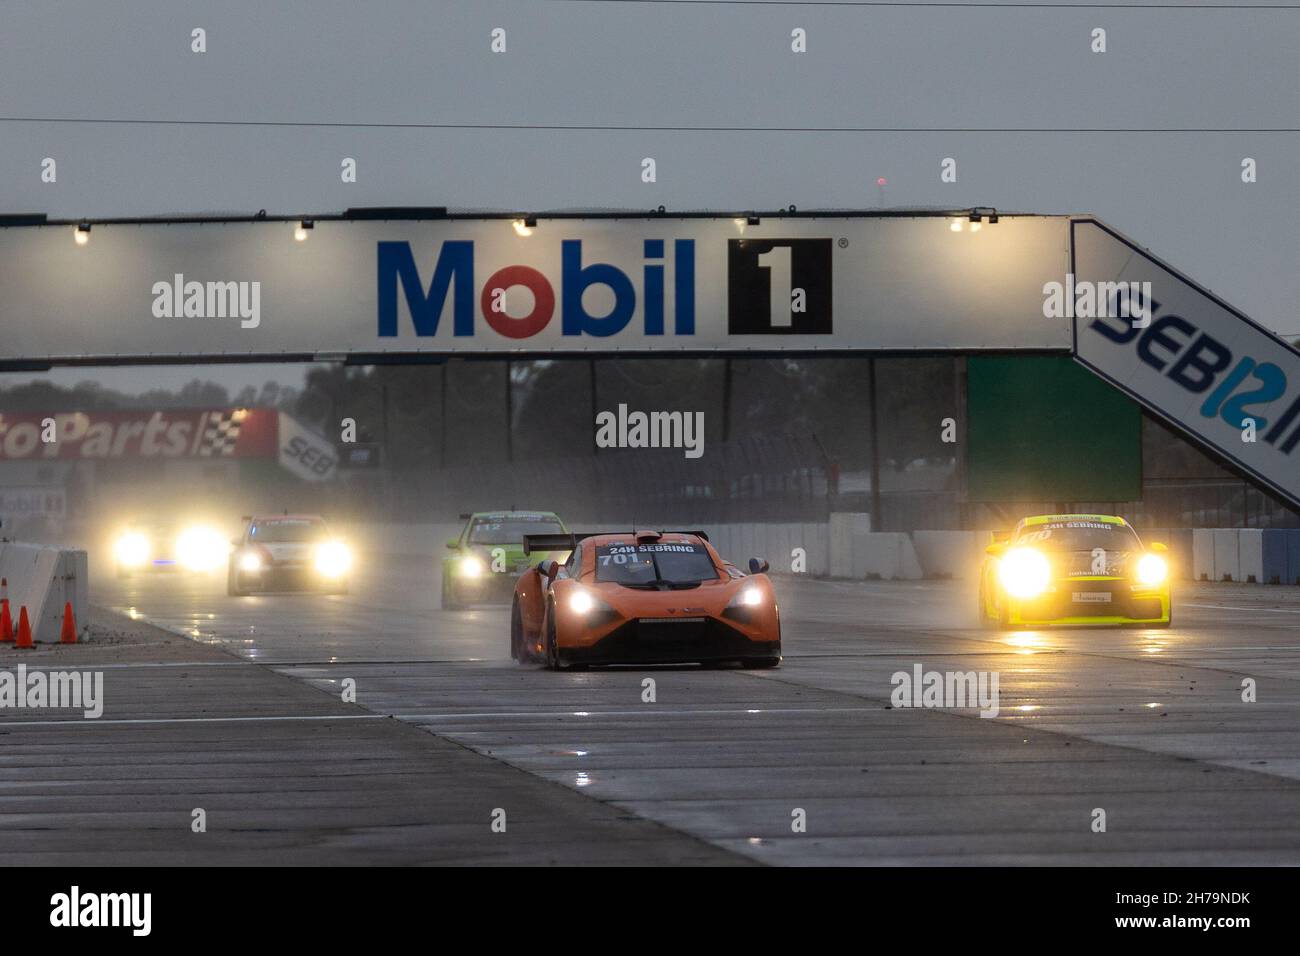 Sebring, USA. 20th Nov, 2021. Start Race 24H Series powered by Hankook. Schedule includes USA stops on November 19-21, 2021. Racing cars from the many countries, such as: Germany, USA, France, Nederland, Romania, Denmark, Canada, Spain, Great Britain, Italy; in many different classes: GT4, 991, GTX, GT3, TCR, TCX, P4. (Photo by Yaroslav Sabitov/YES Market Media/Sipa USA) Credit: Sipa USA/Alamy Live News Stock Photo